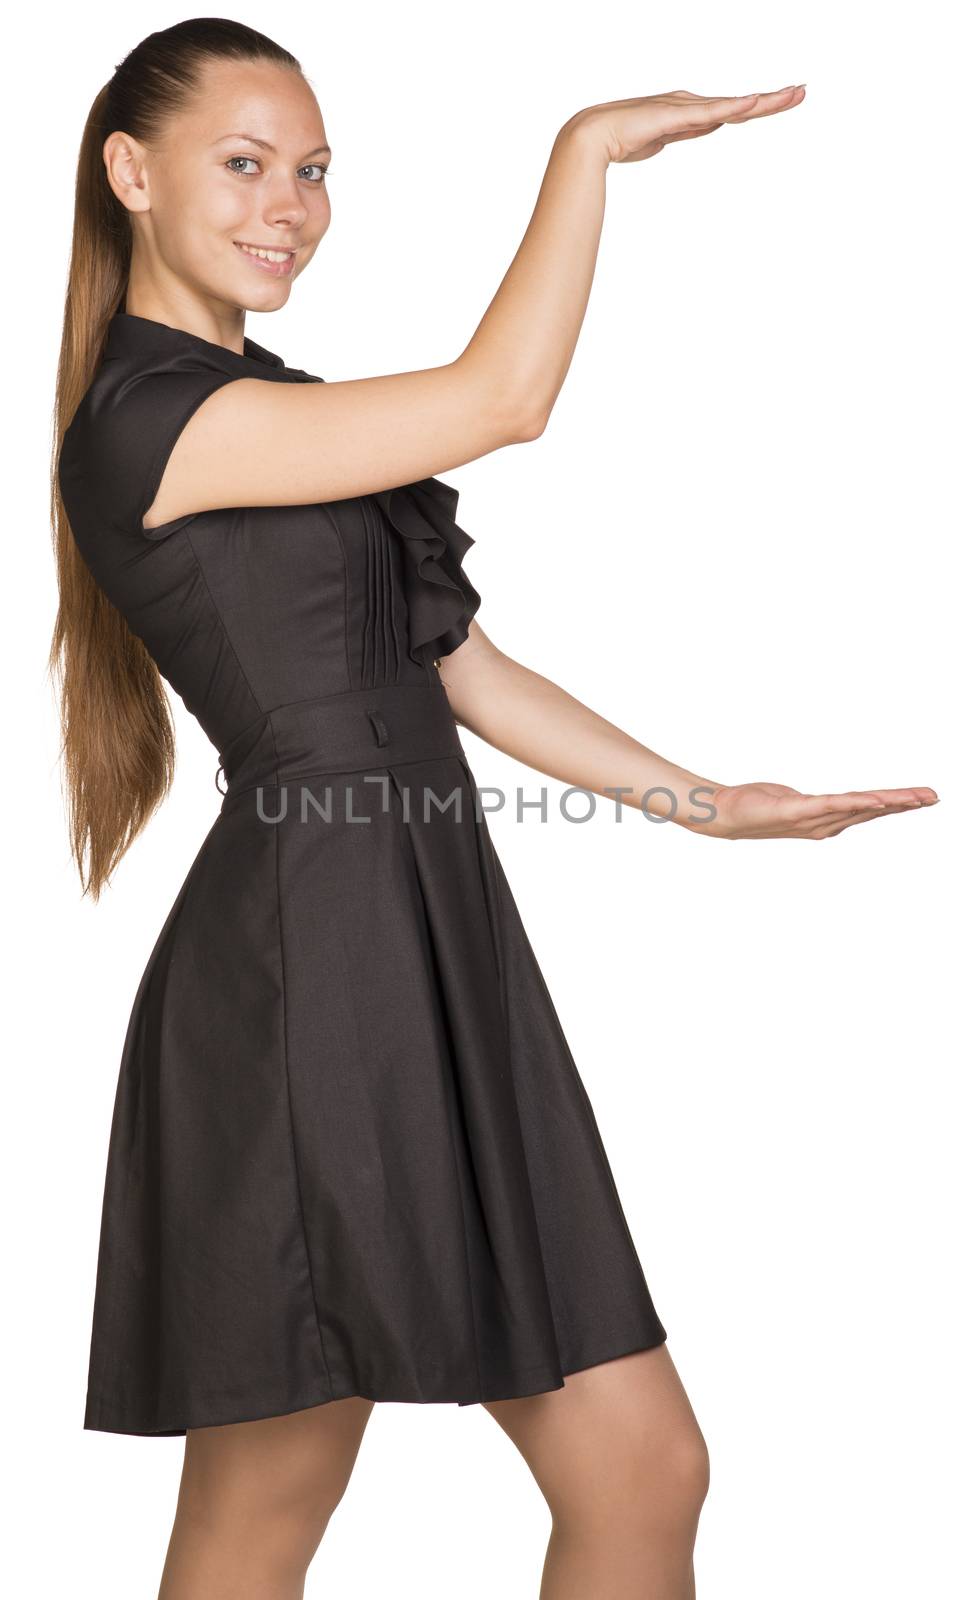 Young beautiful happy woman holding big imaginary object between two hands. Isolated